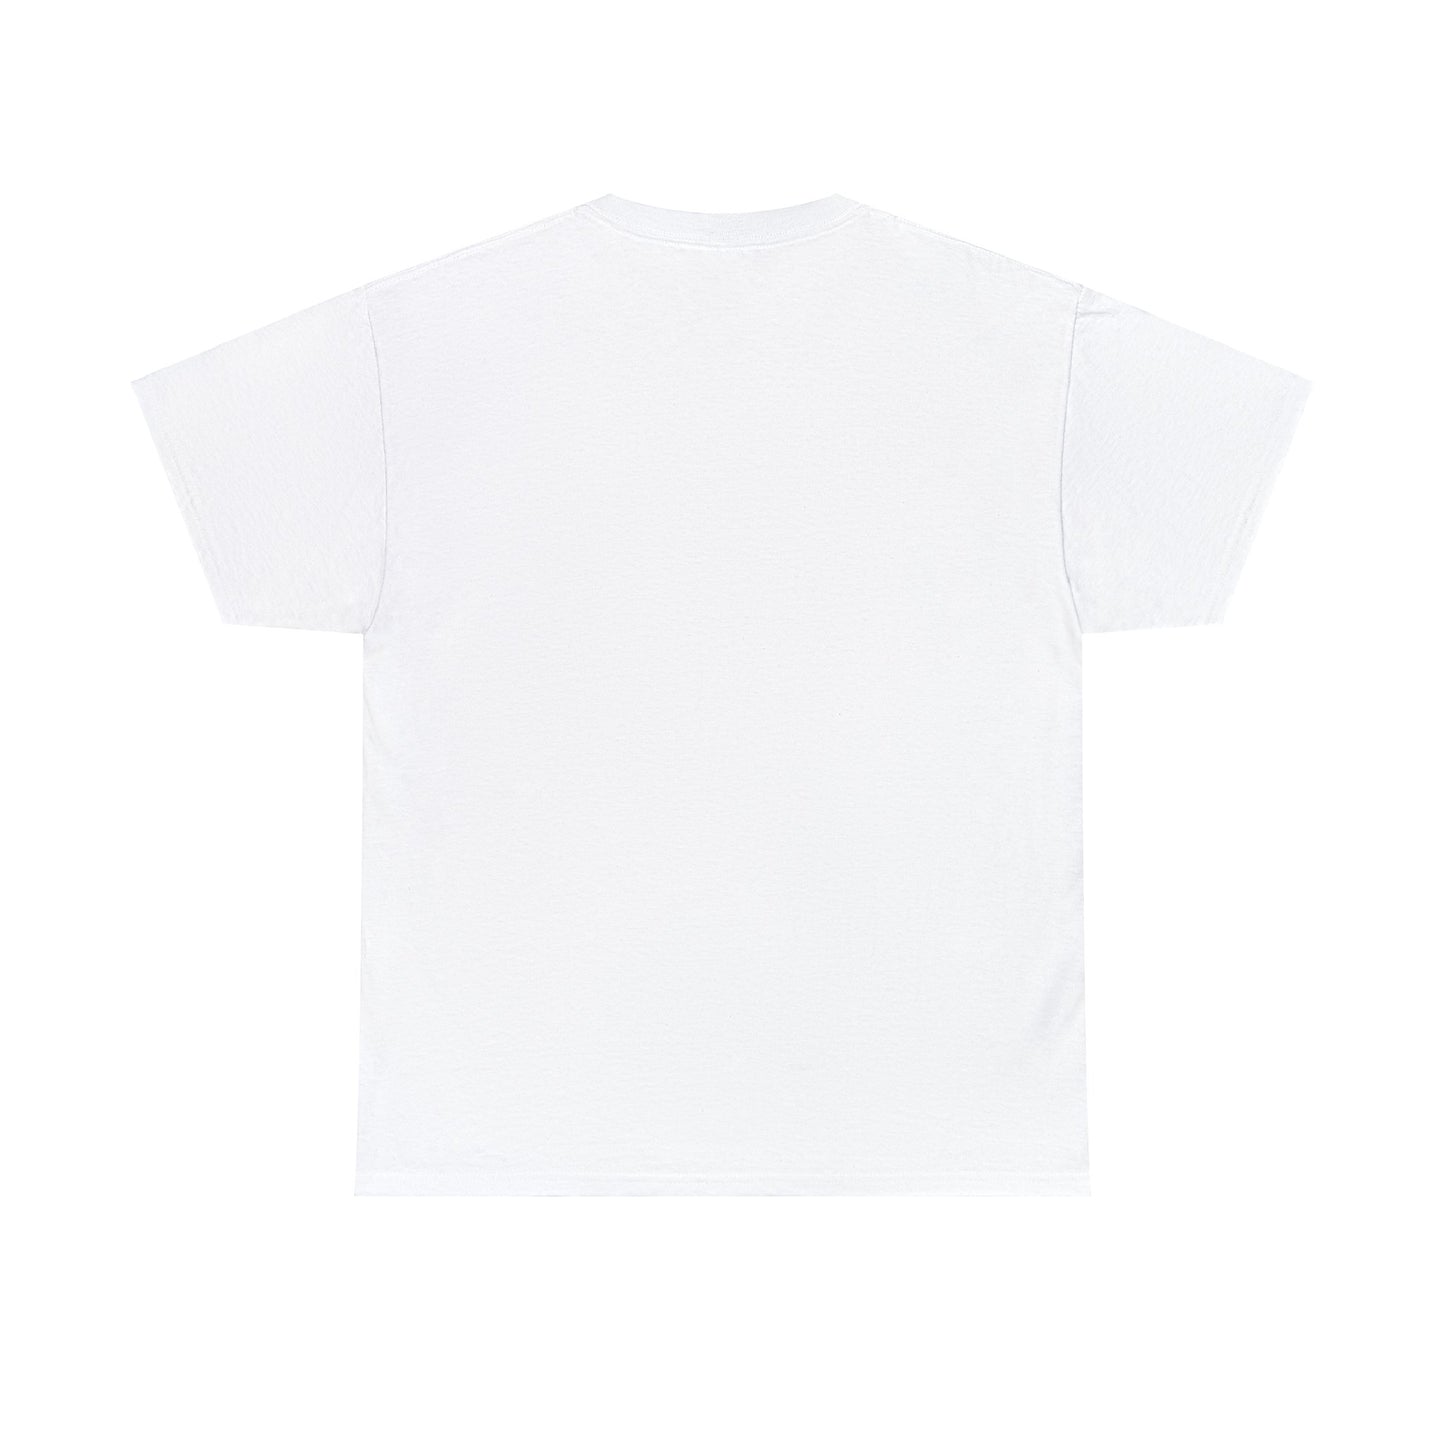 UPW Roster '24 Printed Tee